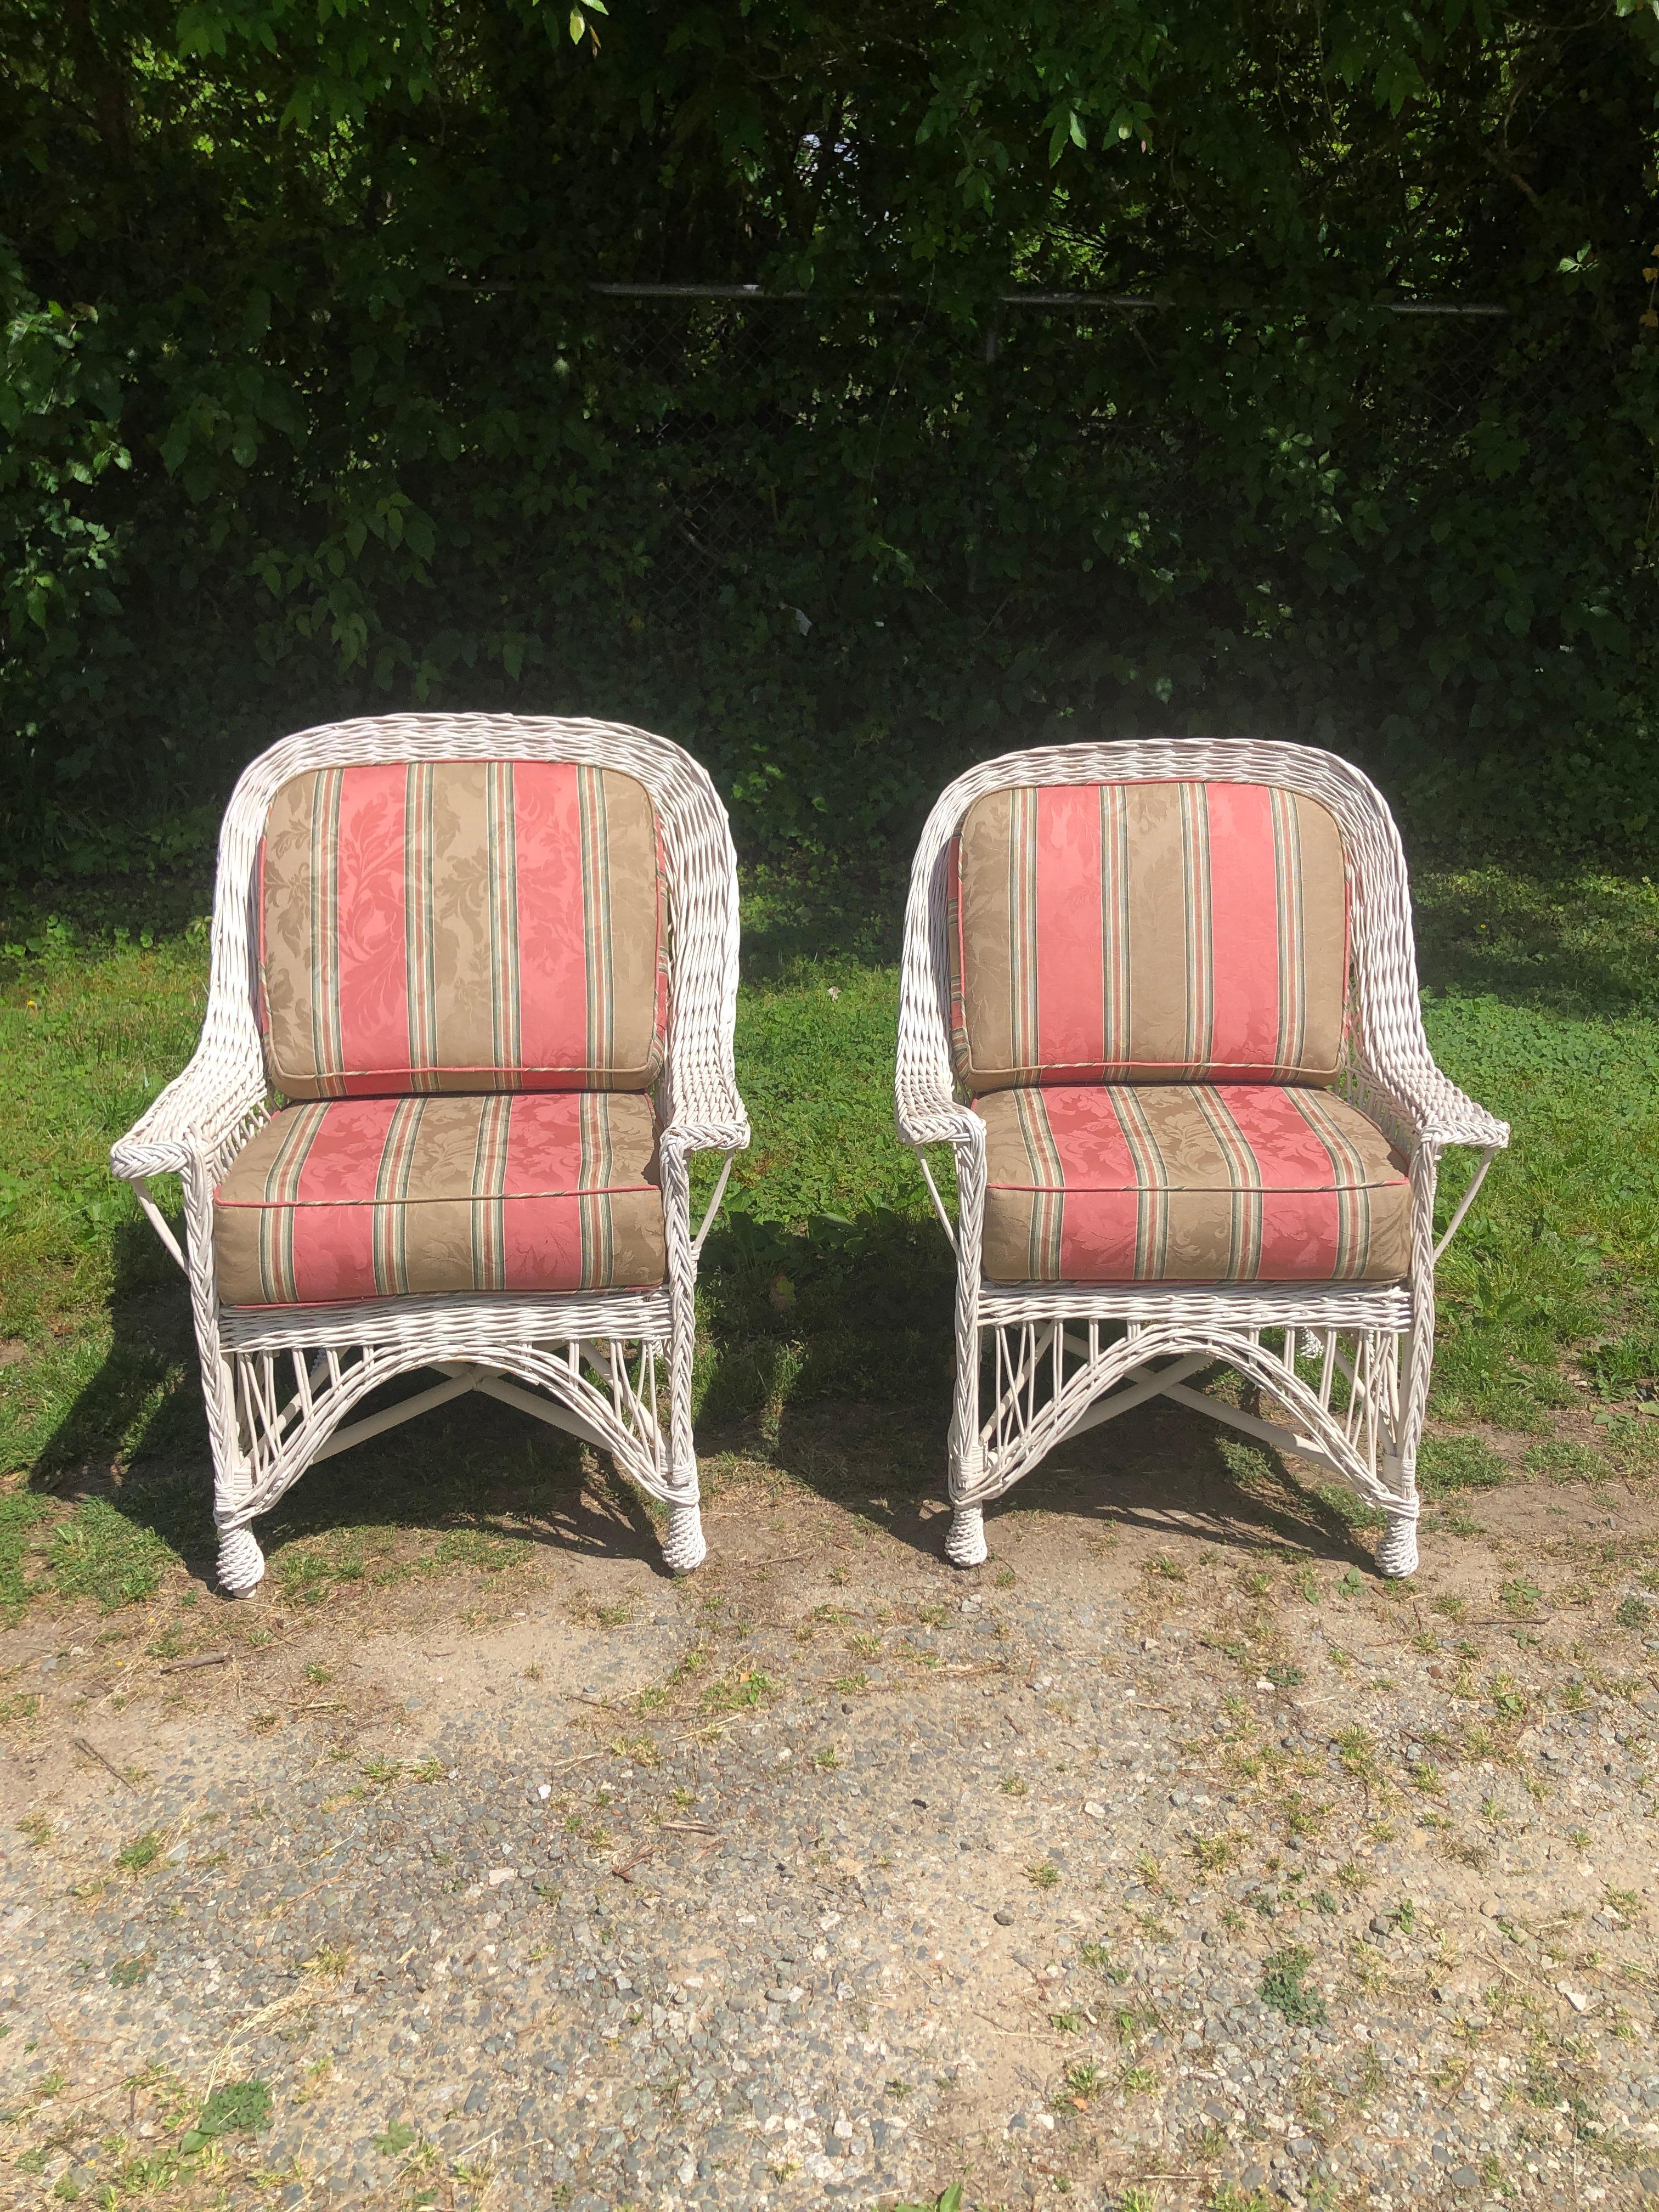 Pair of Bar Harbor White Wicker Armchairs. We have another pair of the same chairs. They are in a separate listing. They all came out the same house. The seats and back cushion upholstery are in good condition. Please contact us for competitive